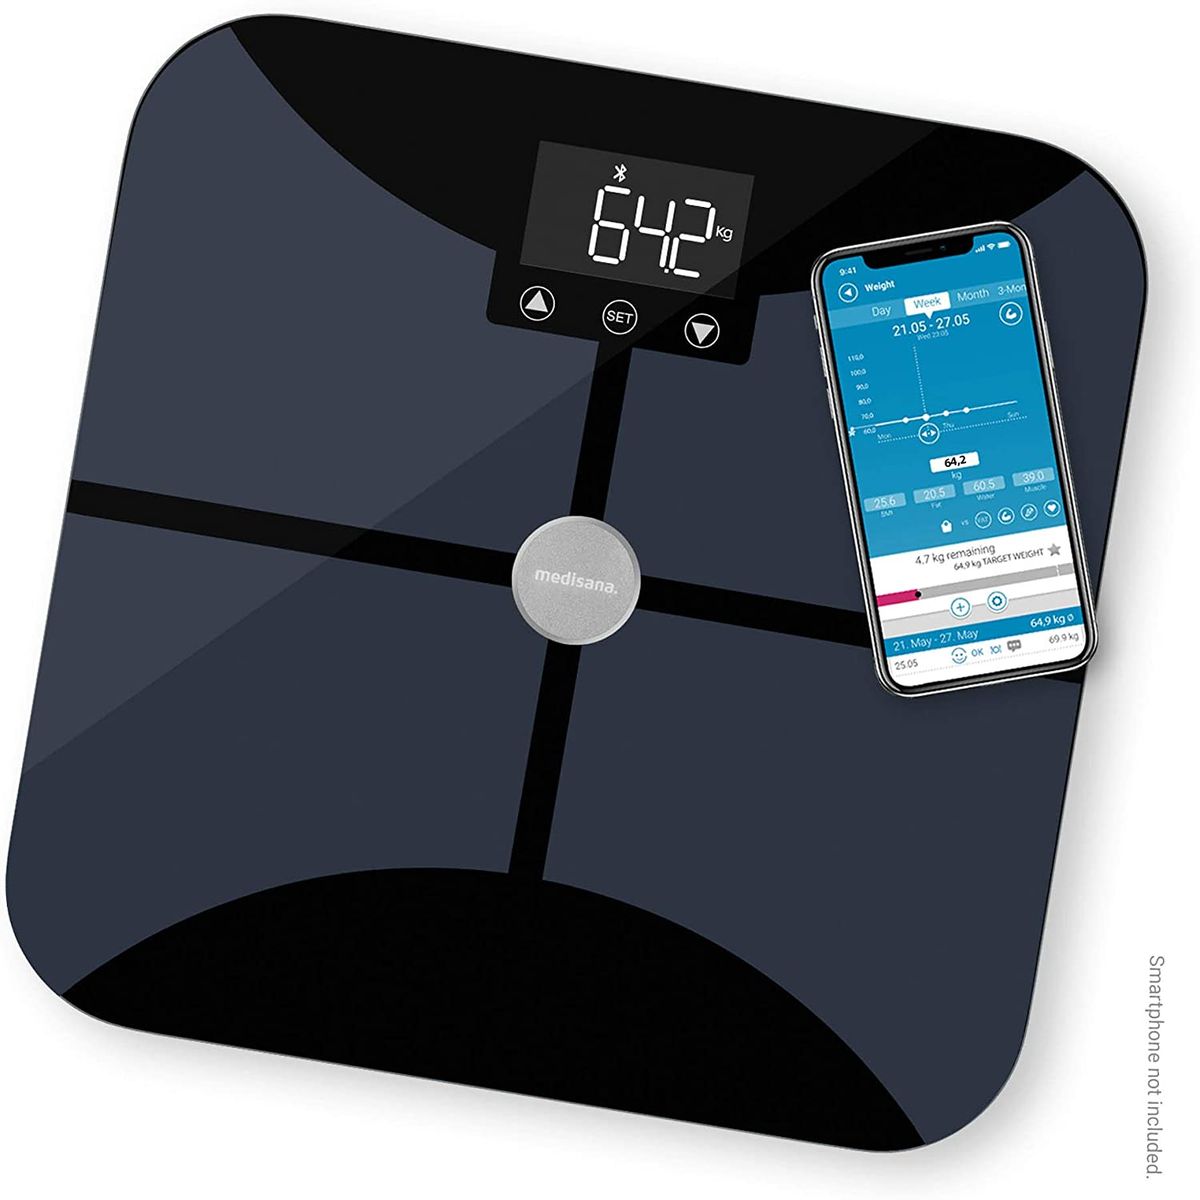 Medisana BS 652 body analysis scale up to 180 kg with W-LAN or Bluetooth, personal scale for measuring body fat, body water, muscle mass and bone weight with VitaDock+ body analysis app, 40502 ITO electrodes